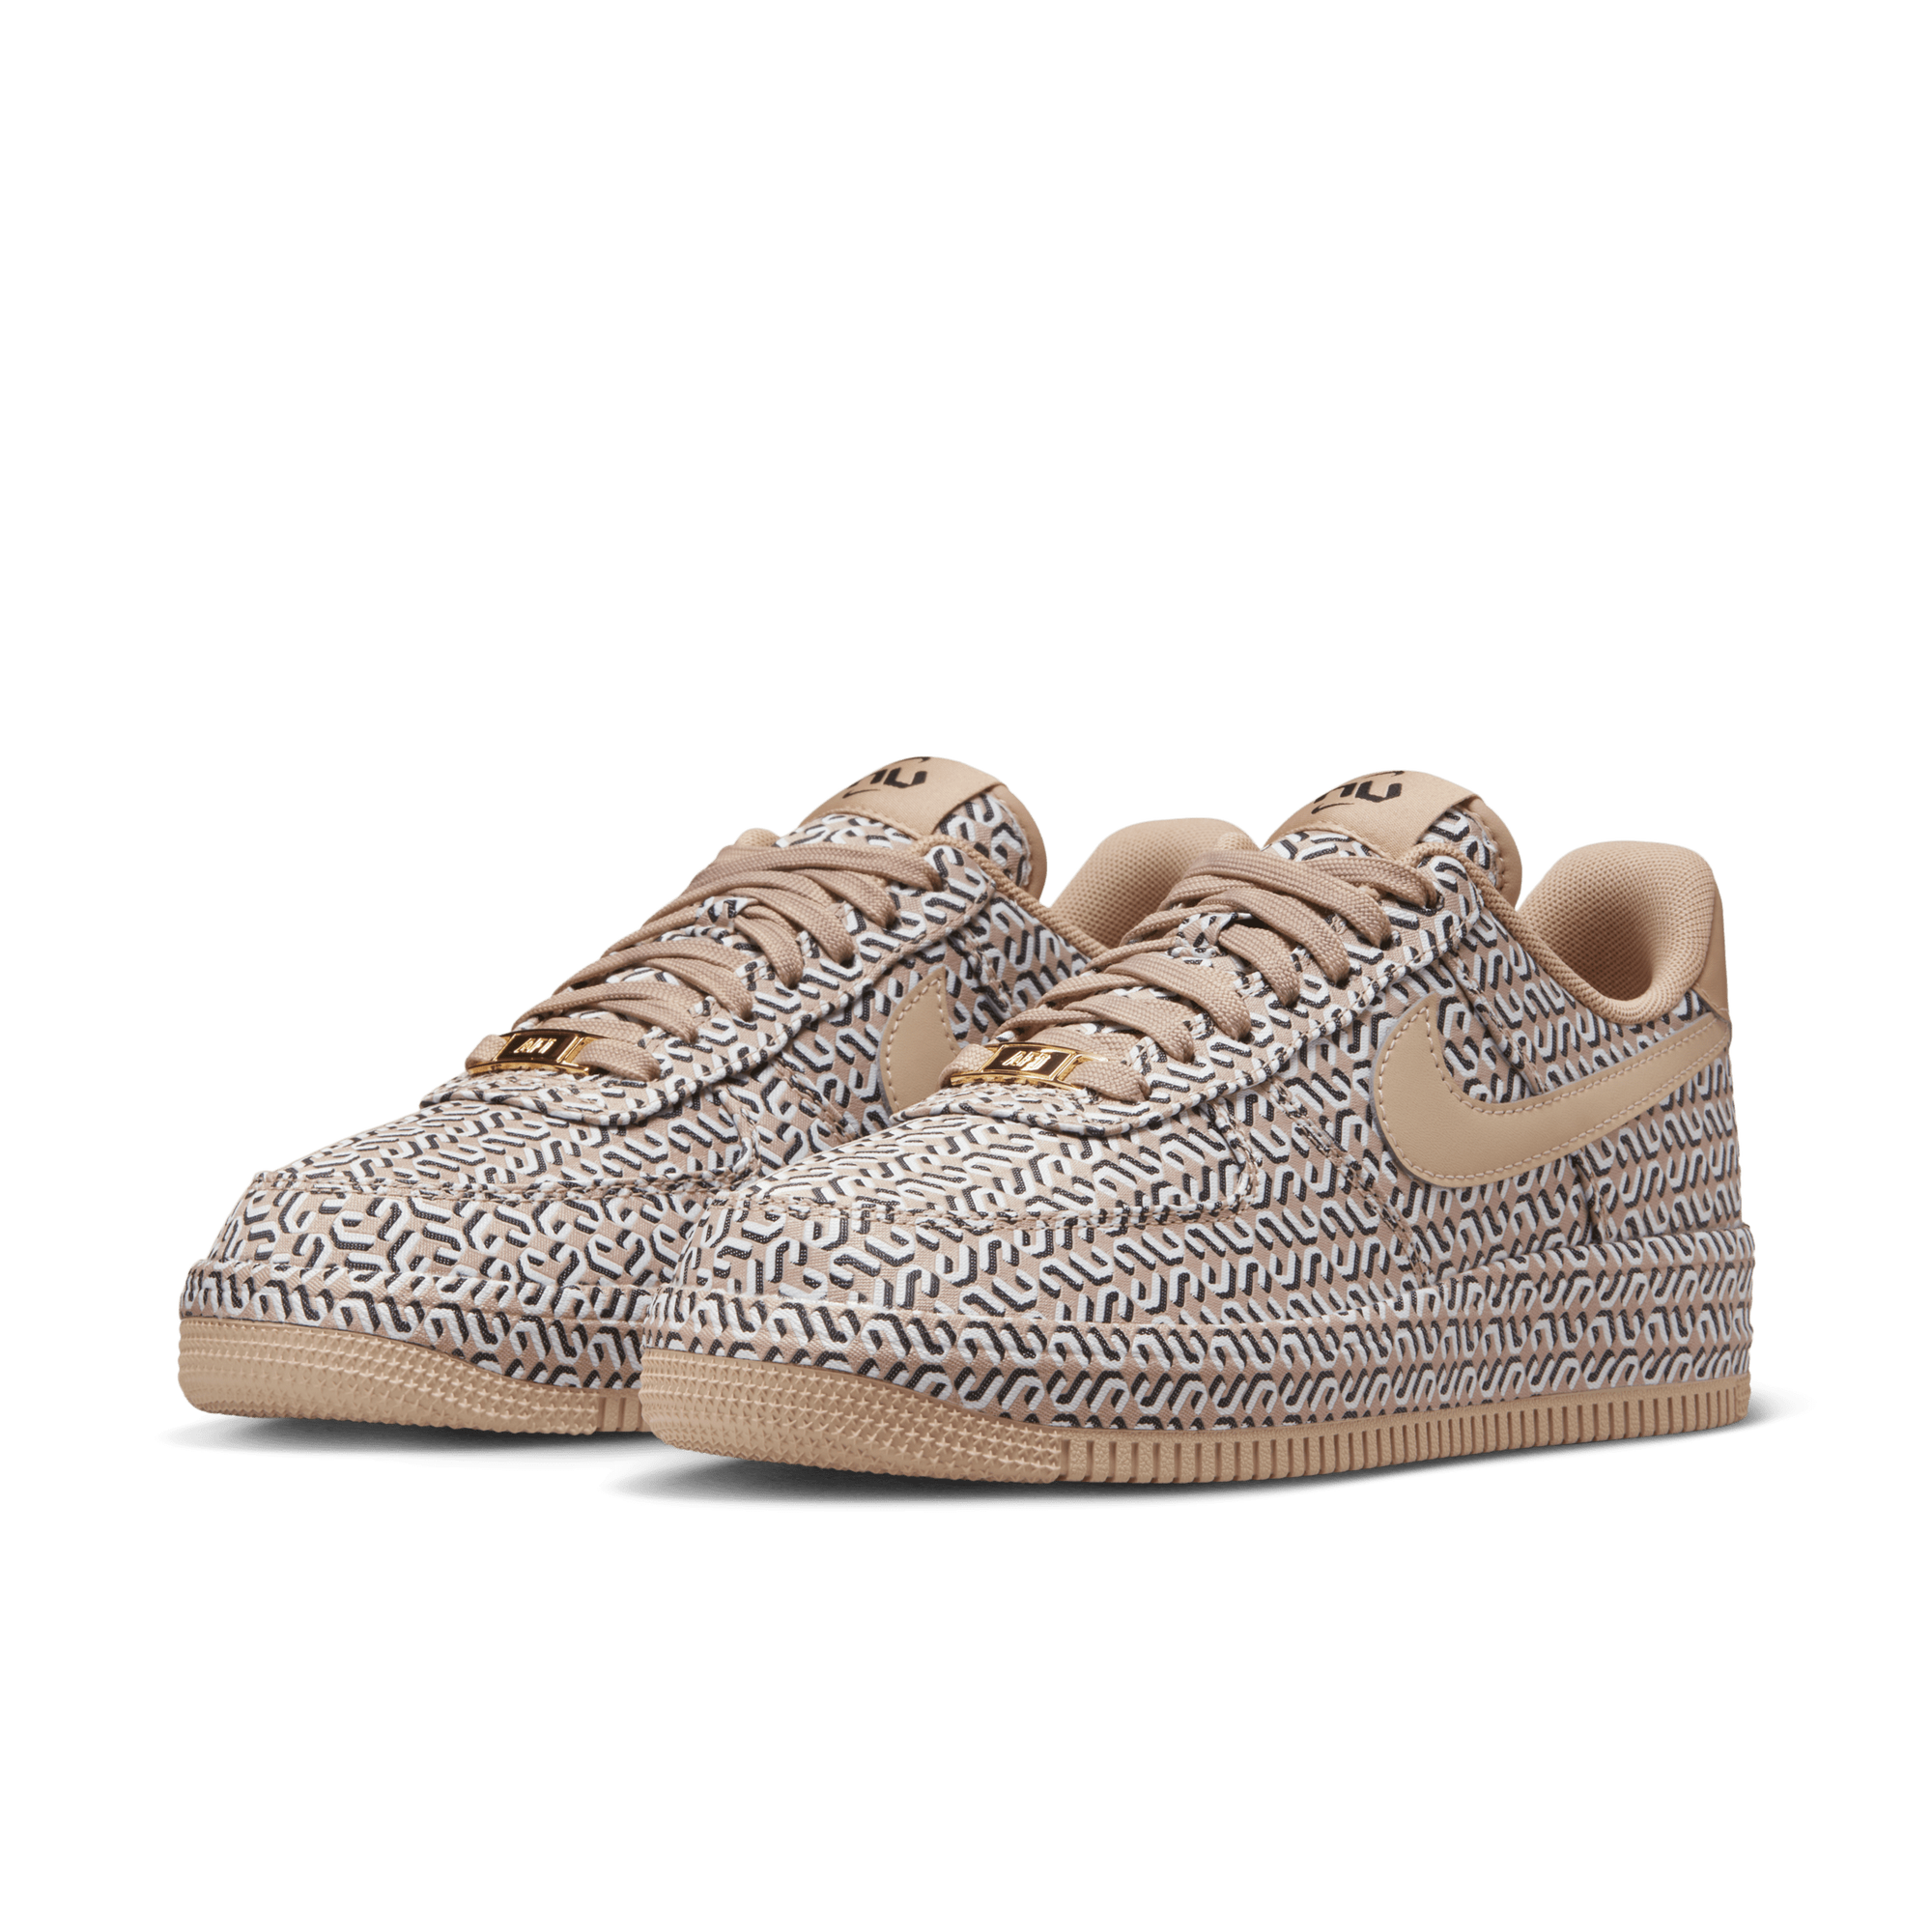 Chaussure Nike Air Force 1 LX United pour femme